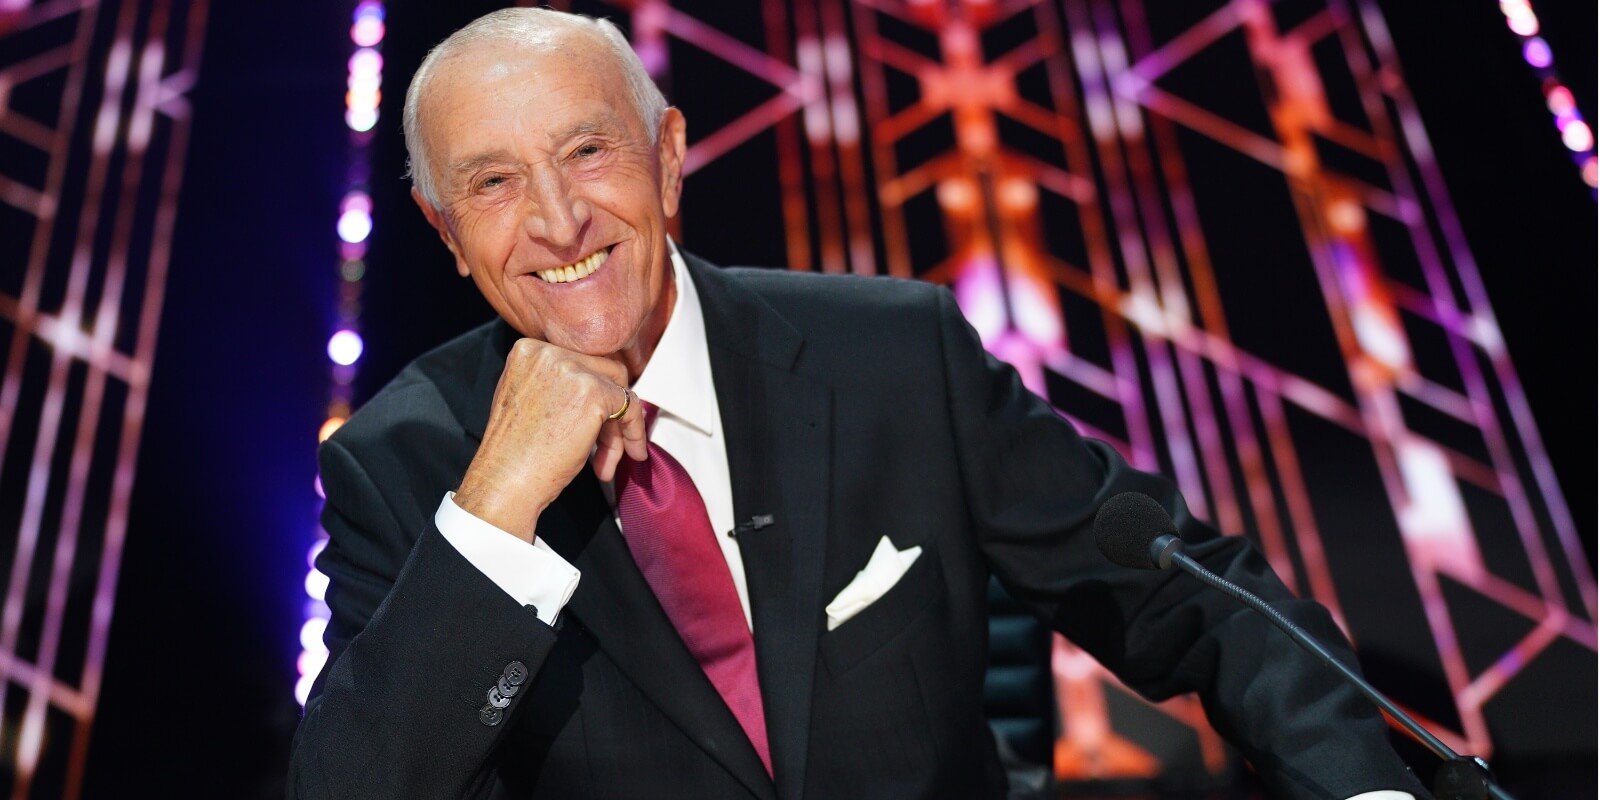 Len Goodman was the head judge on 'Dancing With the Stars' for 31 seasons.